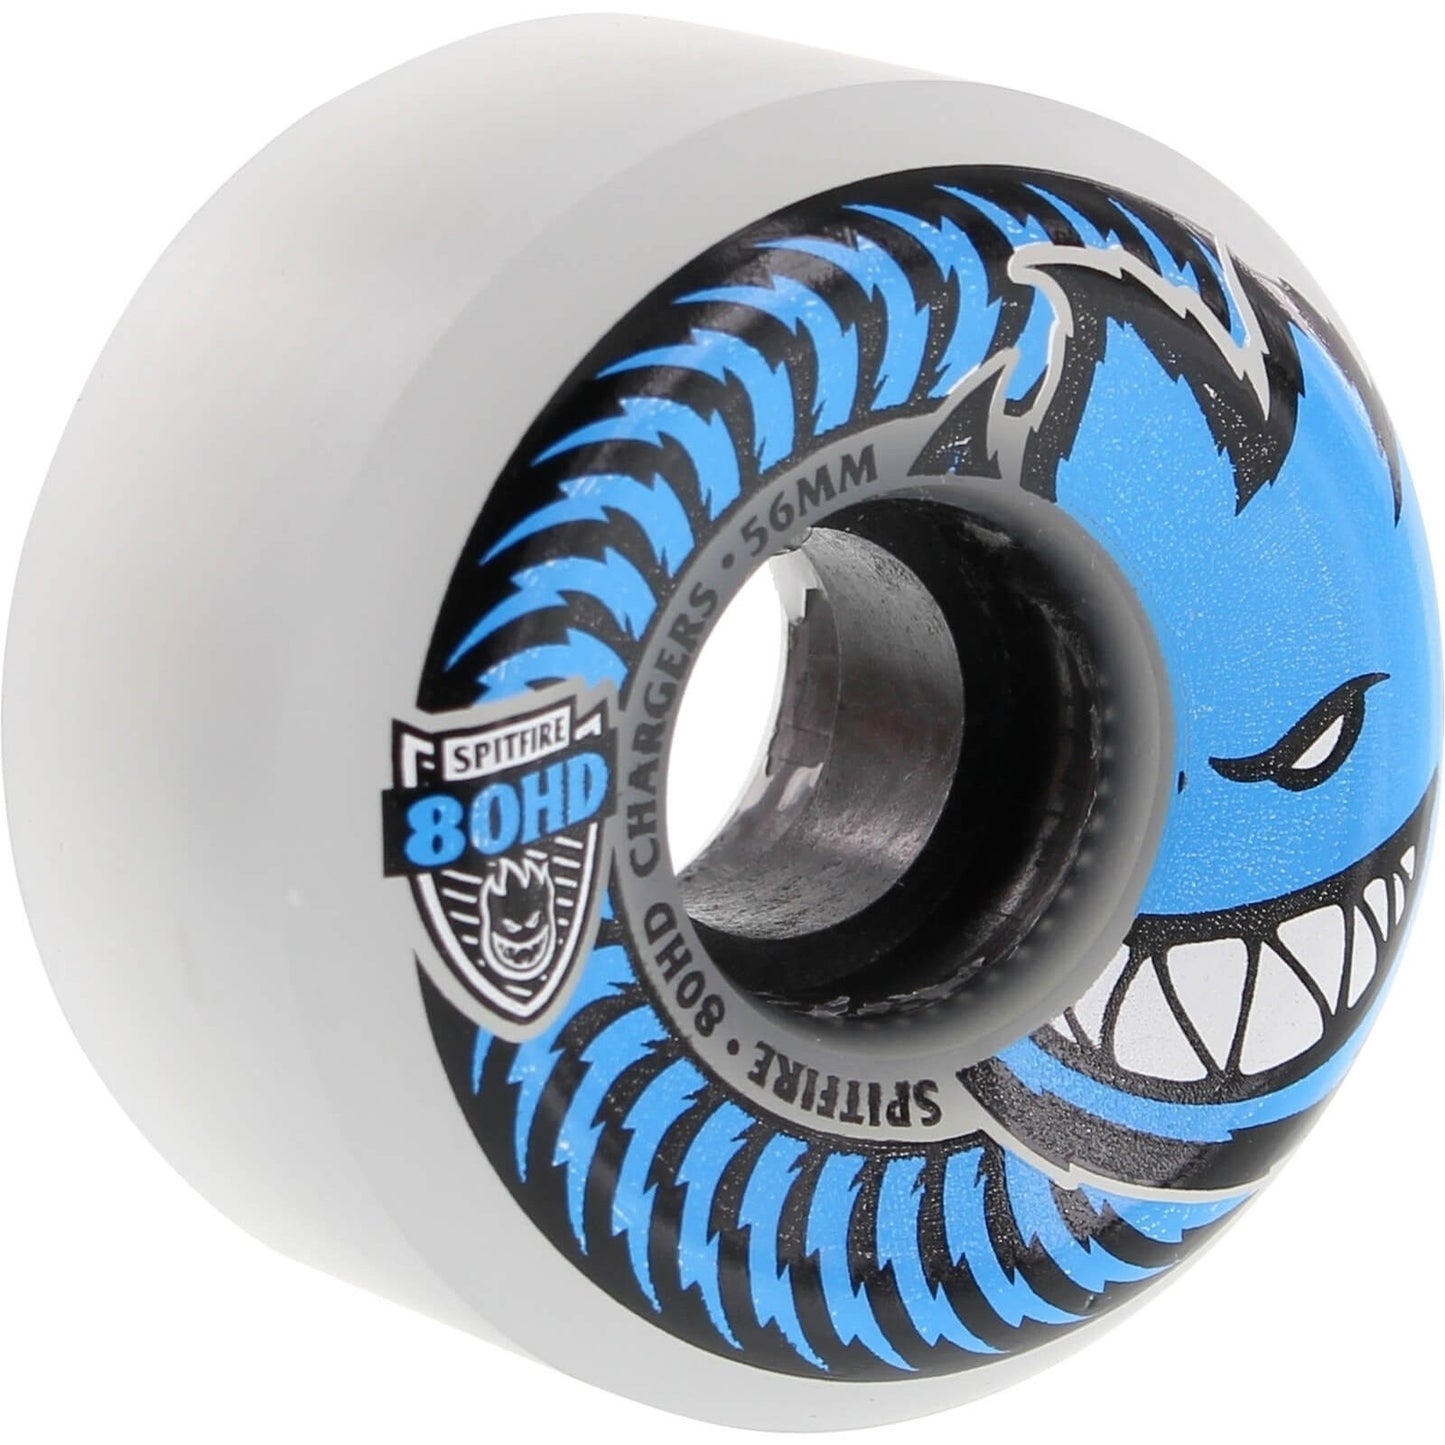 80HD Charger Conical Skateboard Wheels (58mm)